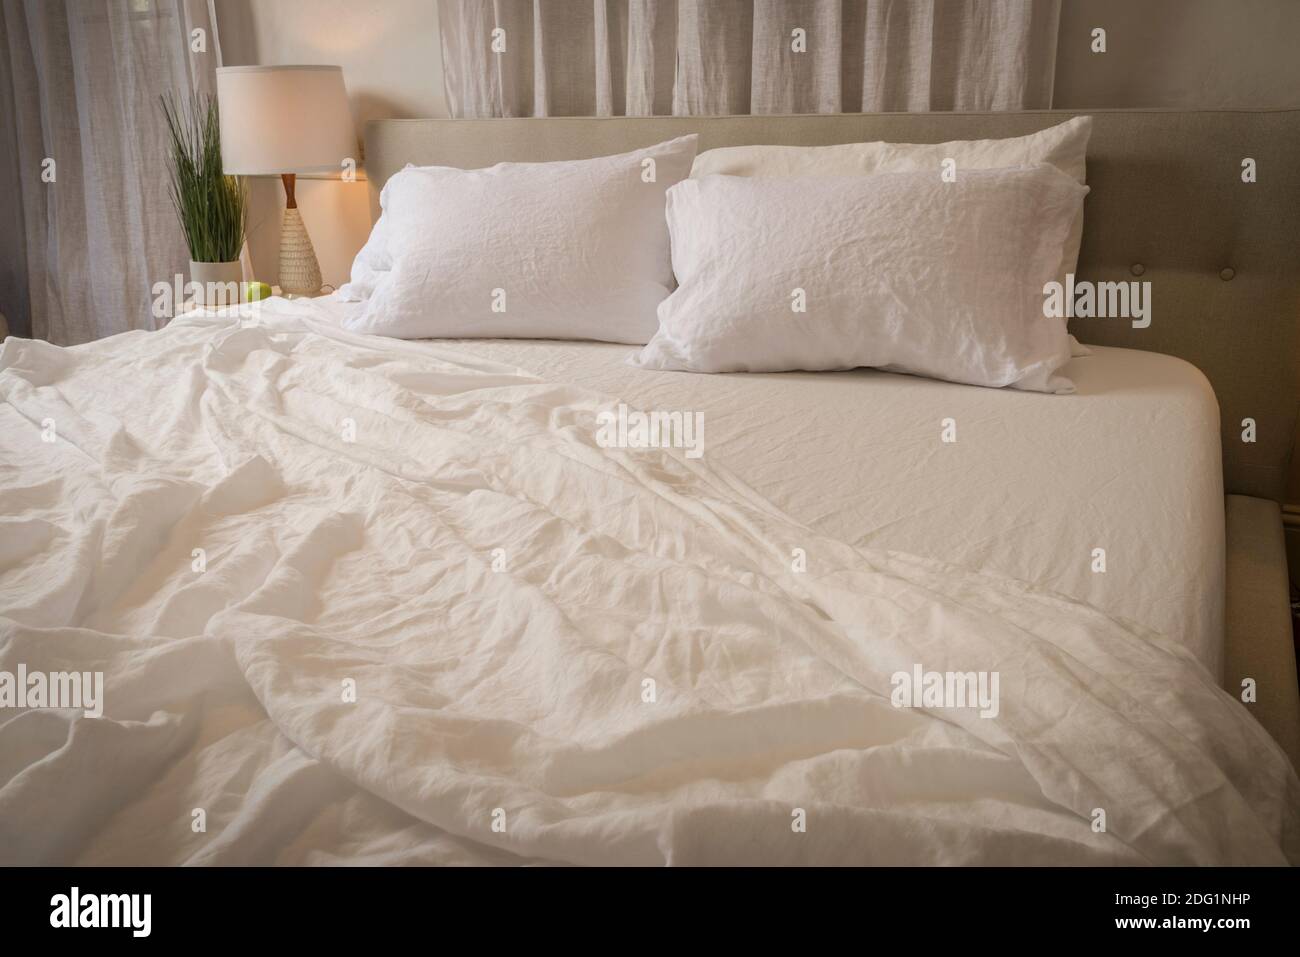 Wrinkled bed sheets in messy bedroom, USA Stock Photo